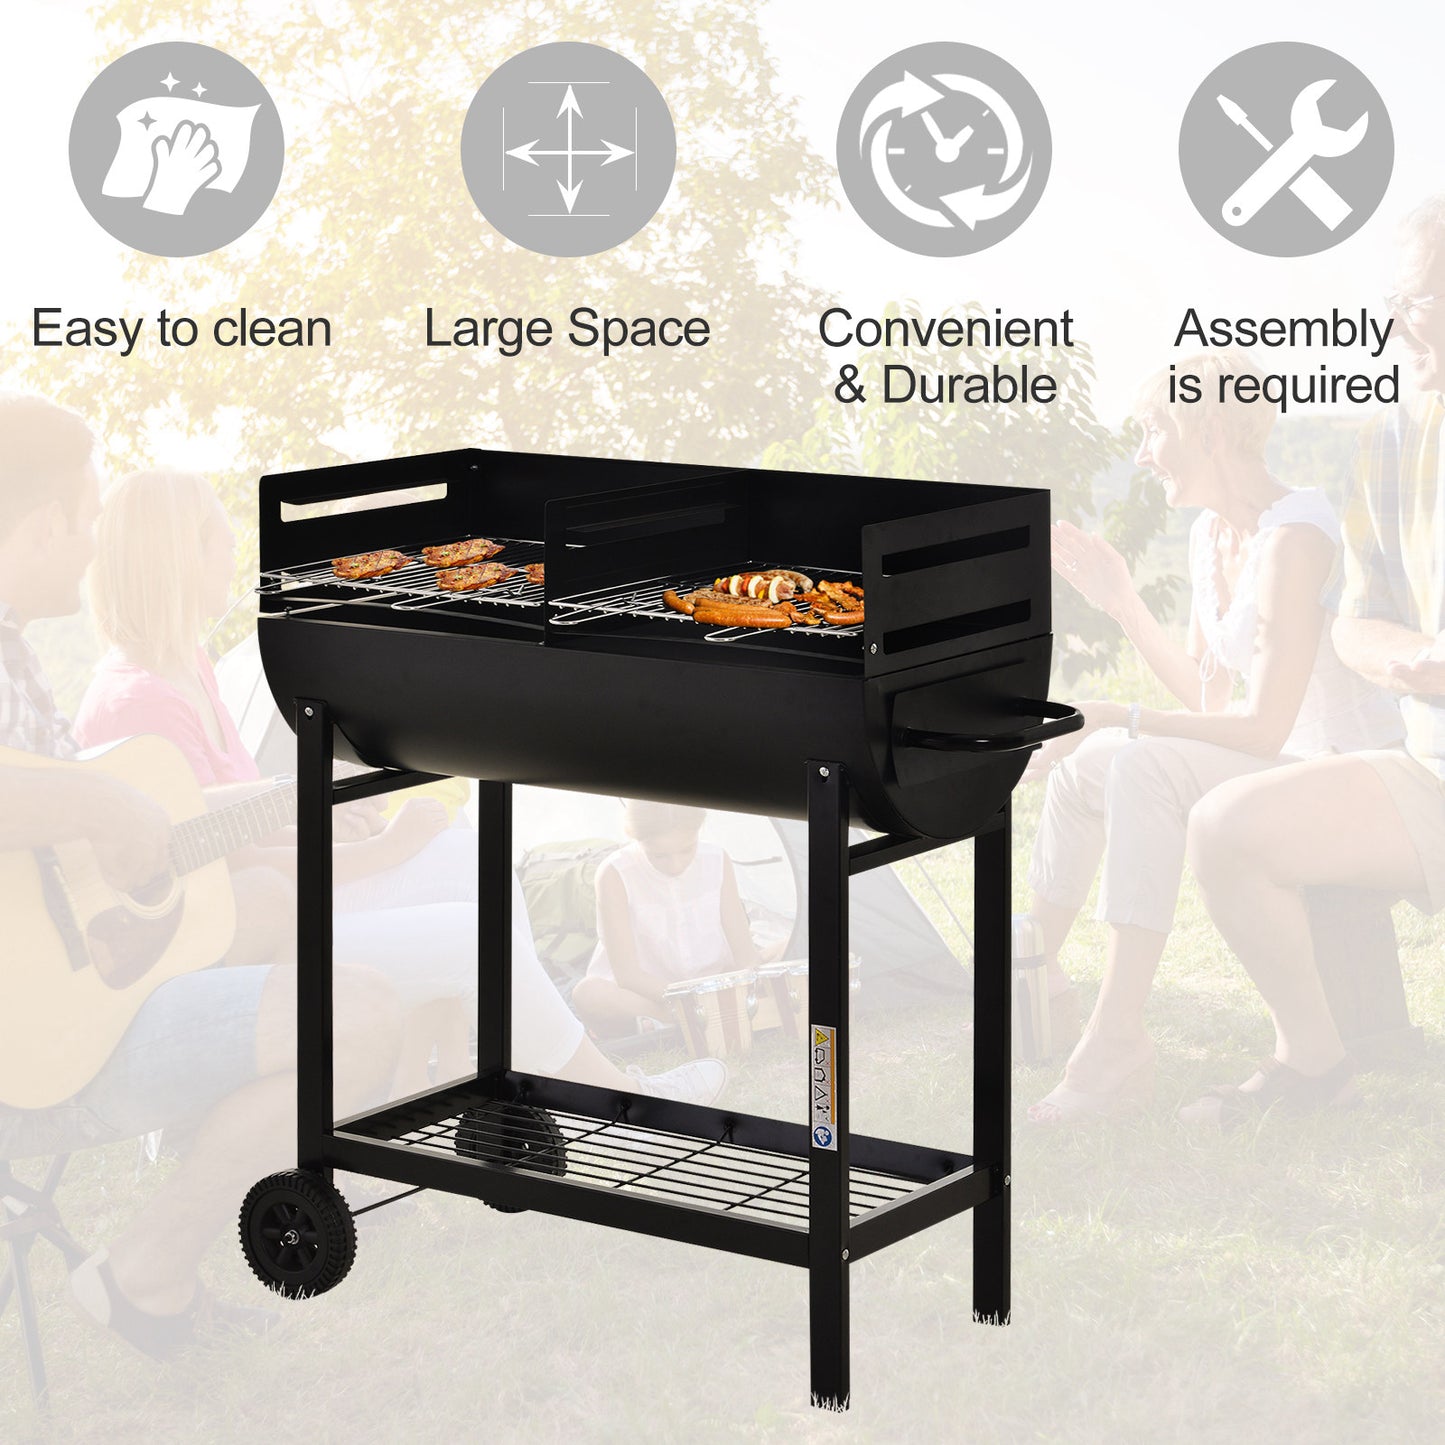 Outsunny Trolley Charcoal BBQ Barbecue Grill Cooker Patio Outdoor Garden Heating Heat Smoker with Wheels, Black 90 x 45 x 96cm